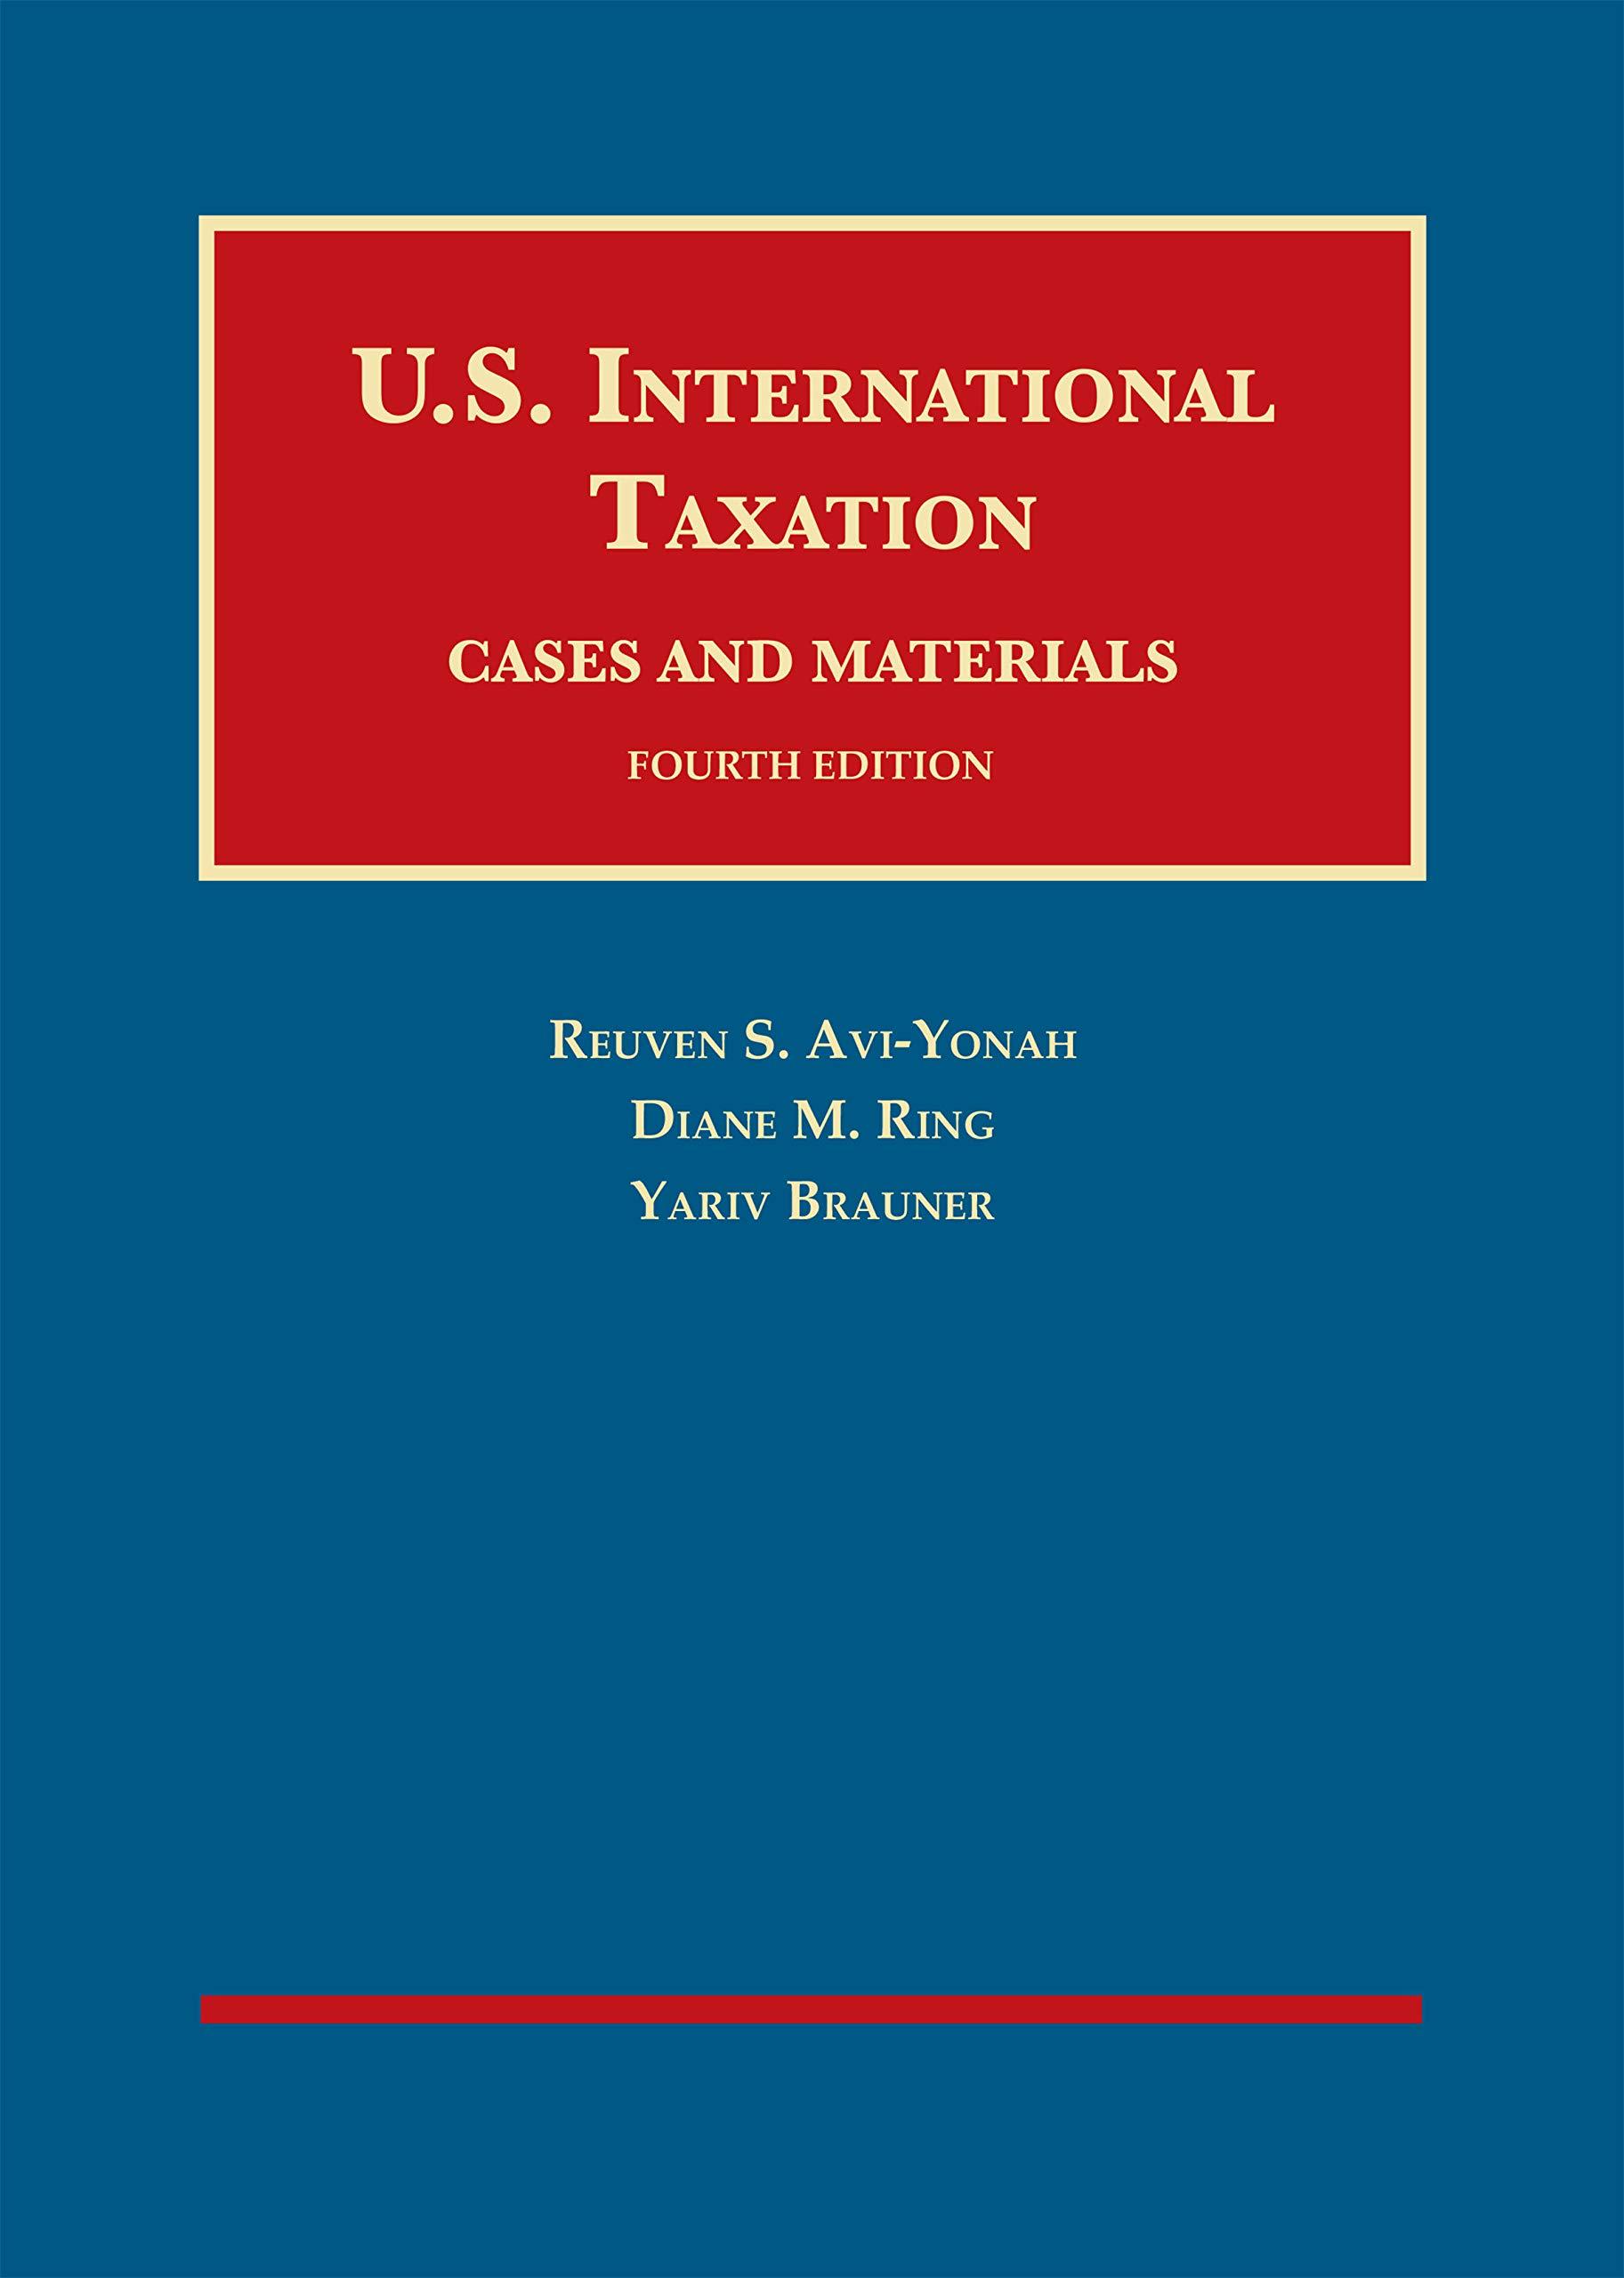 us international taxation cases and materials 4th edition reuven avi yonah, diane ring, yariv brauner